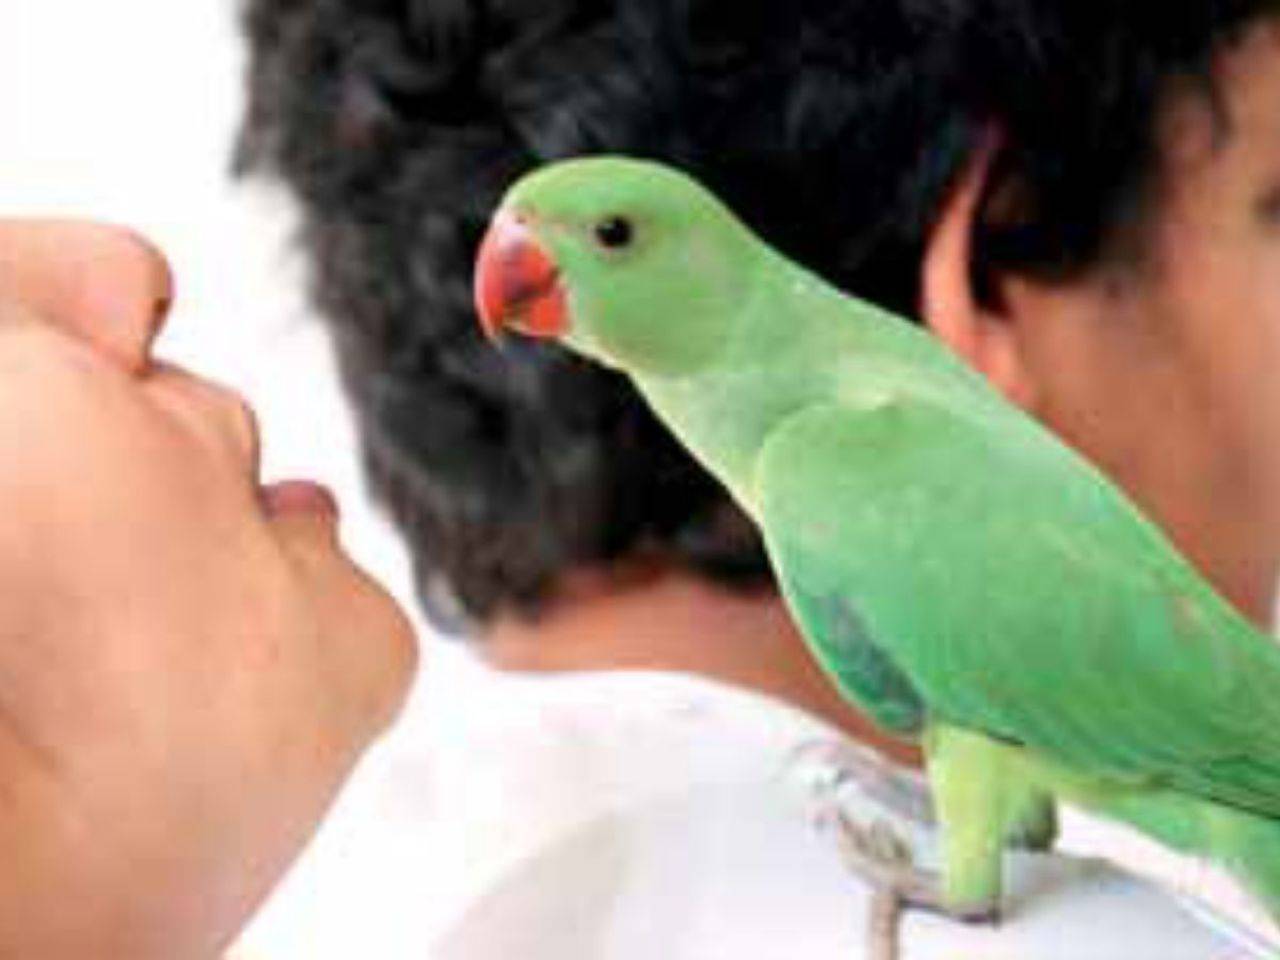 Let them soar: A sweet story of baby parrots - Times of India